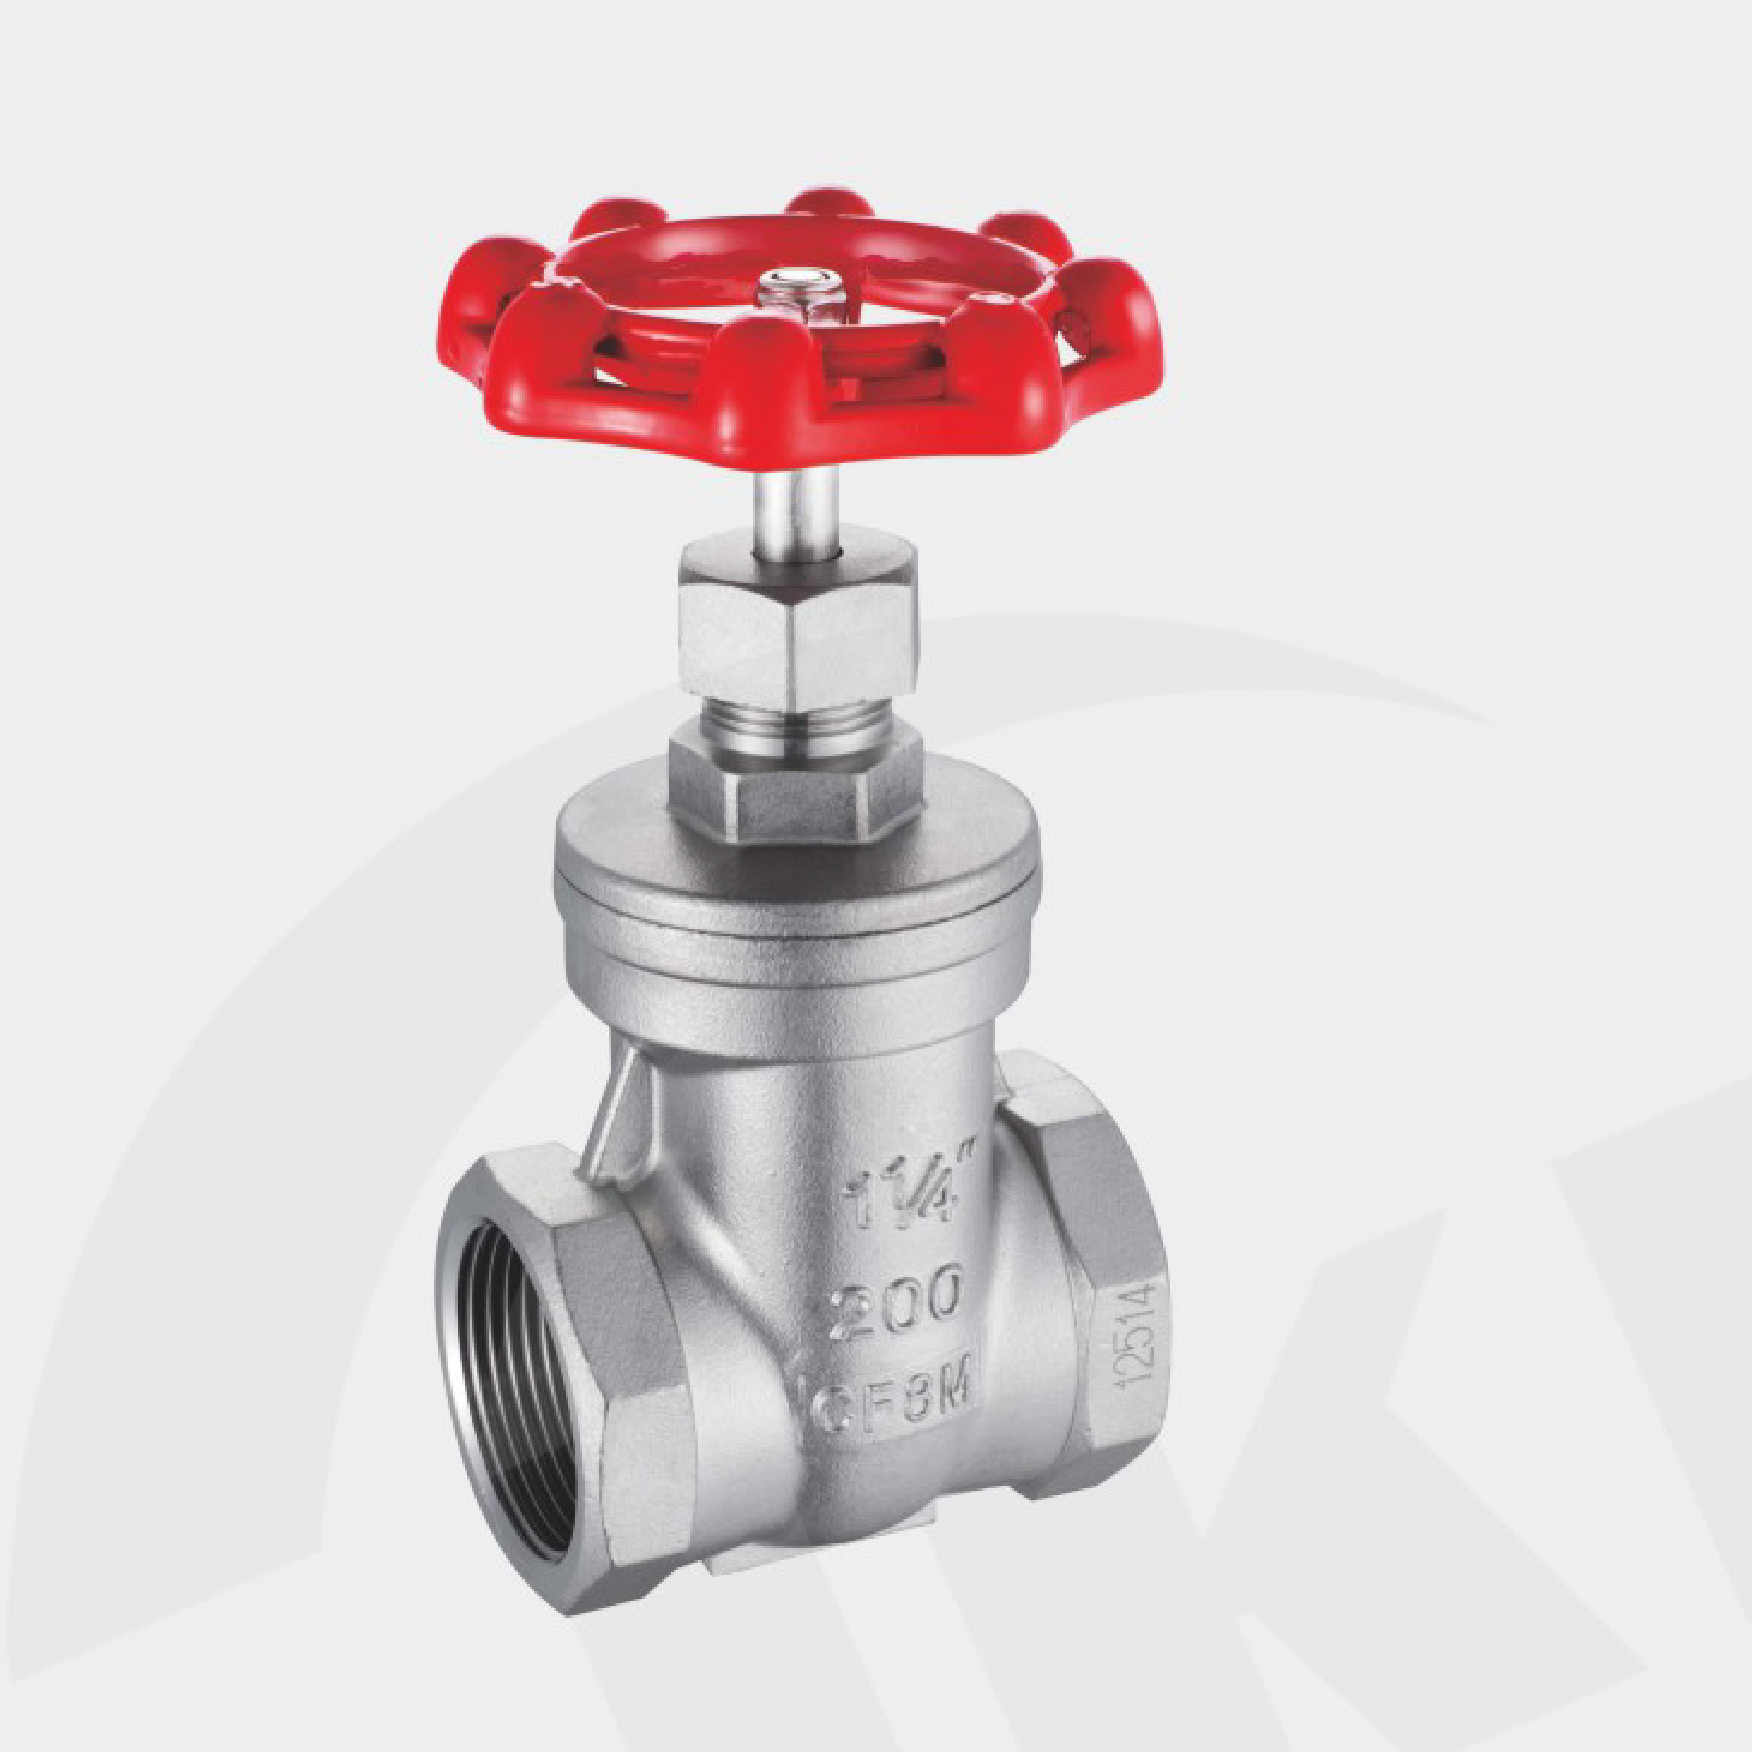 The development of valve industry is inseparable from quality management